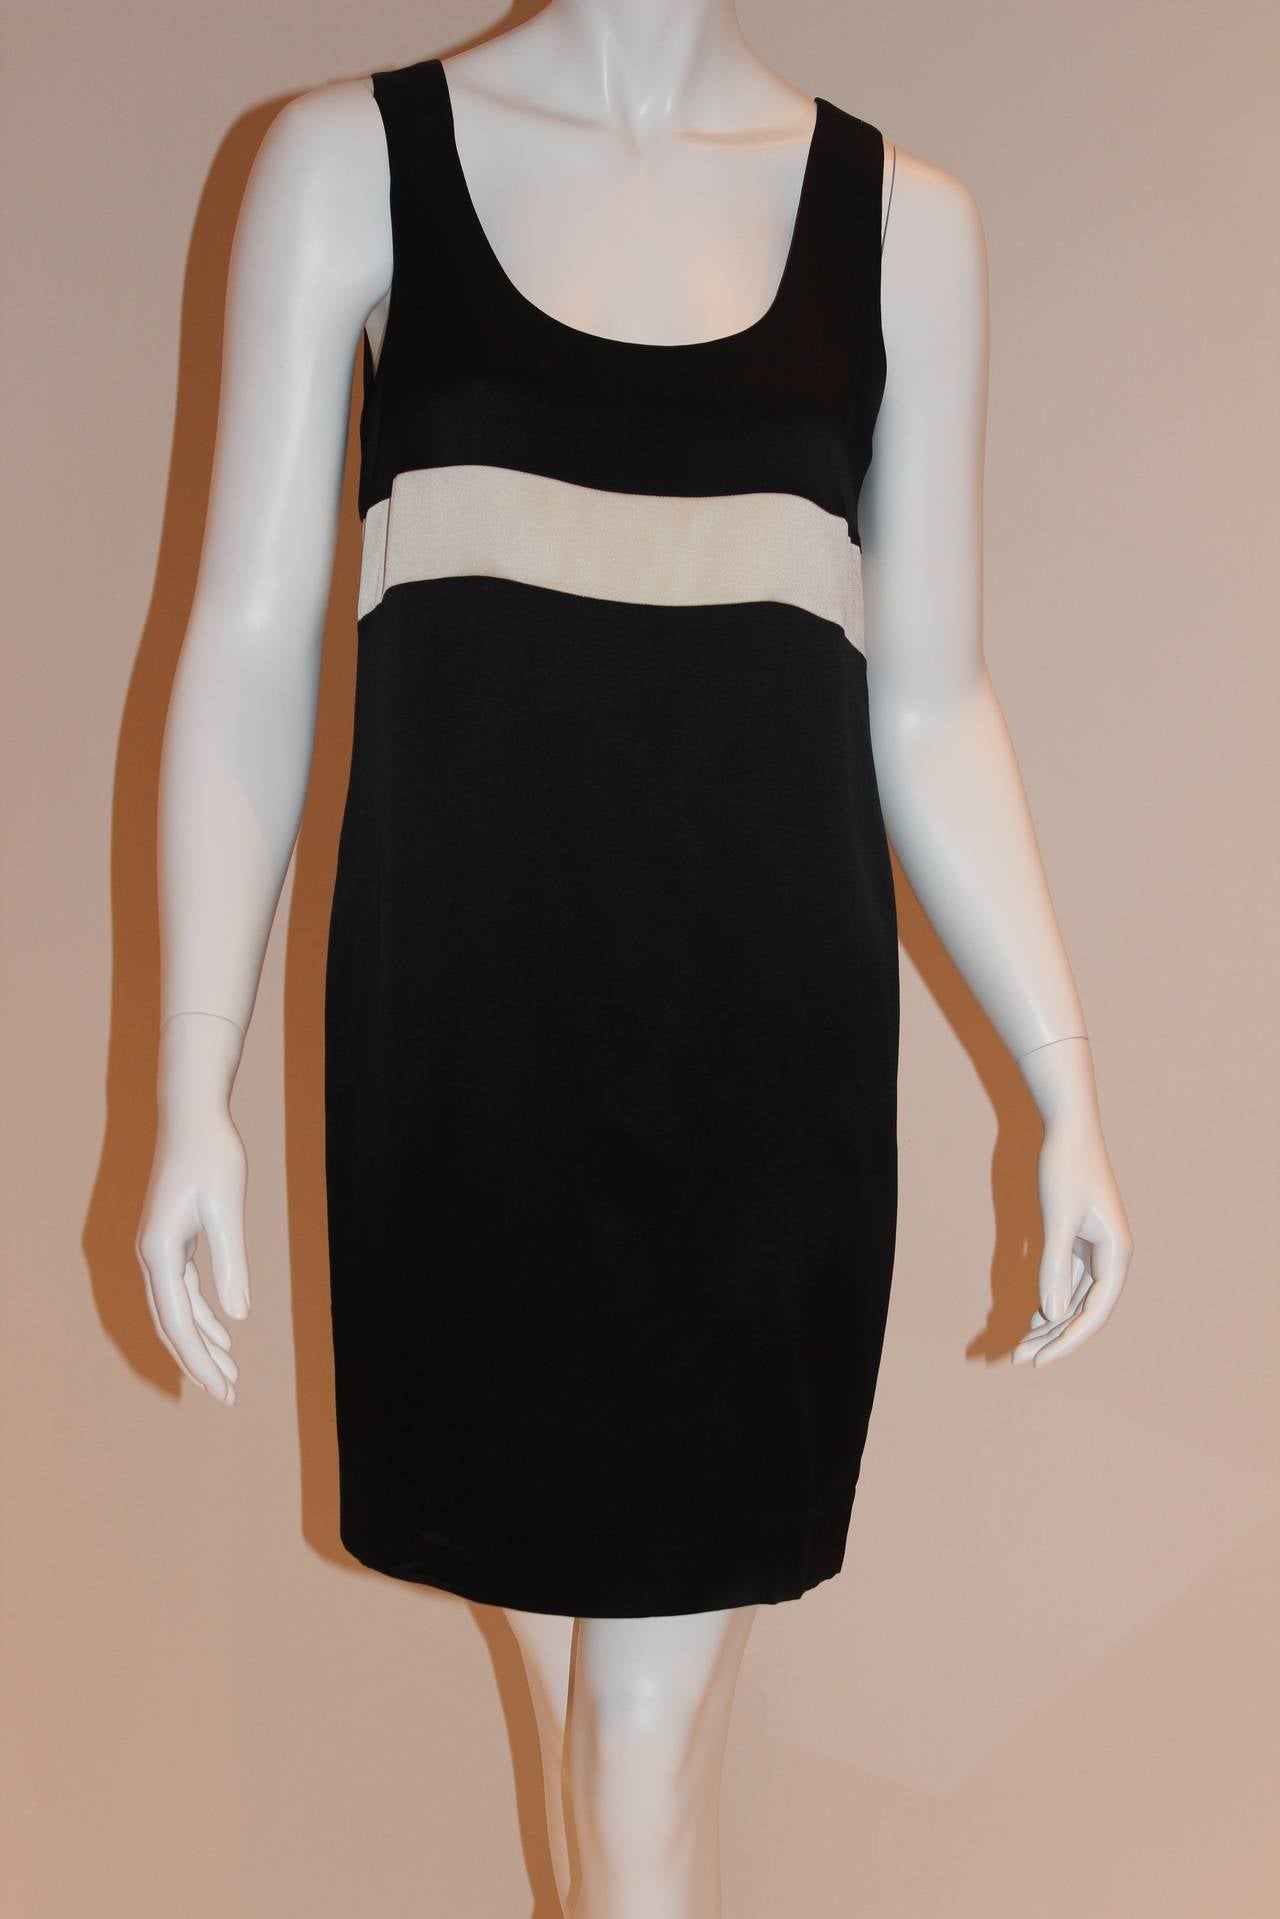 This sleeveless, straight-cut black and white silk Chanel dress contains a subtle, scoop neckline and a thick white stripe that circles around entirely. Dress is knee-length and in excellent, barely worn condition.